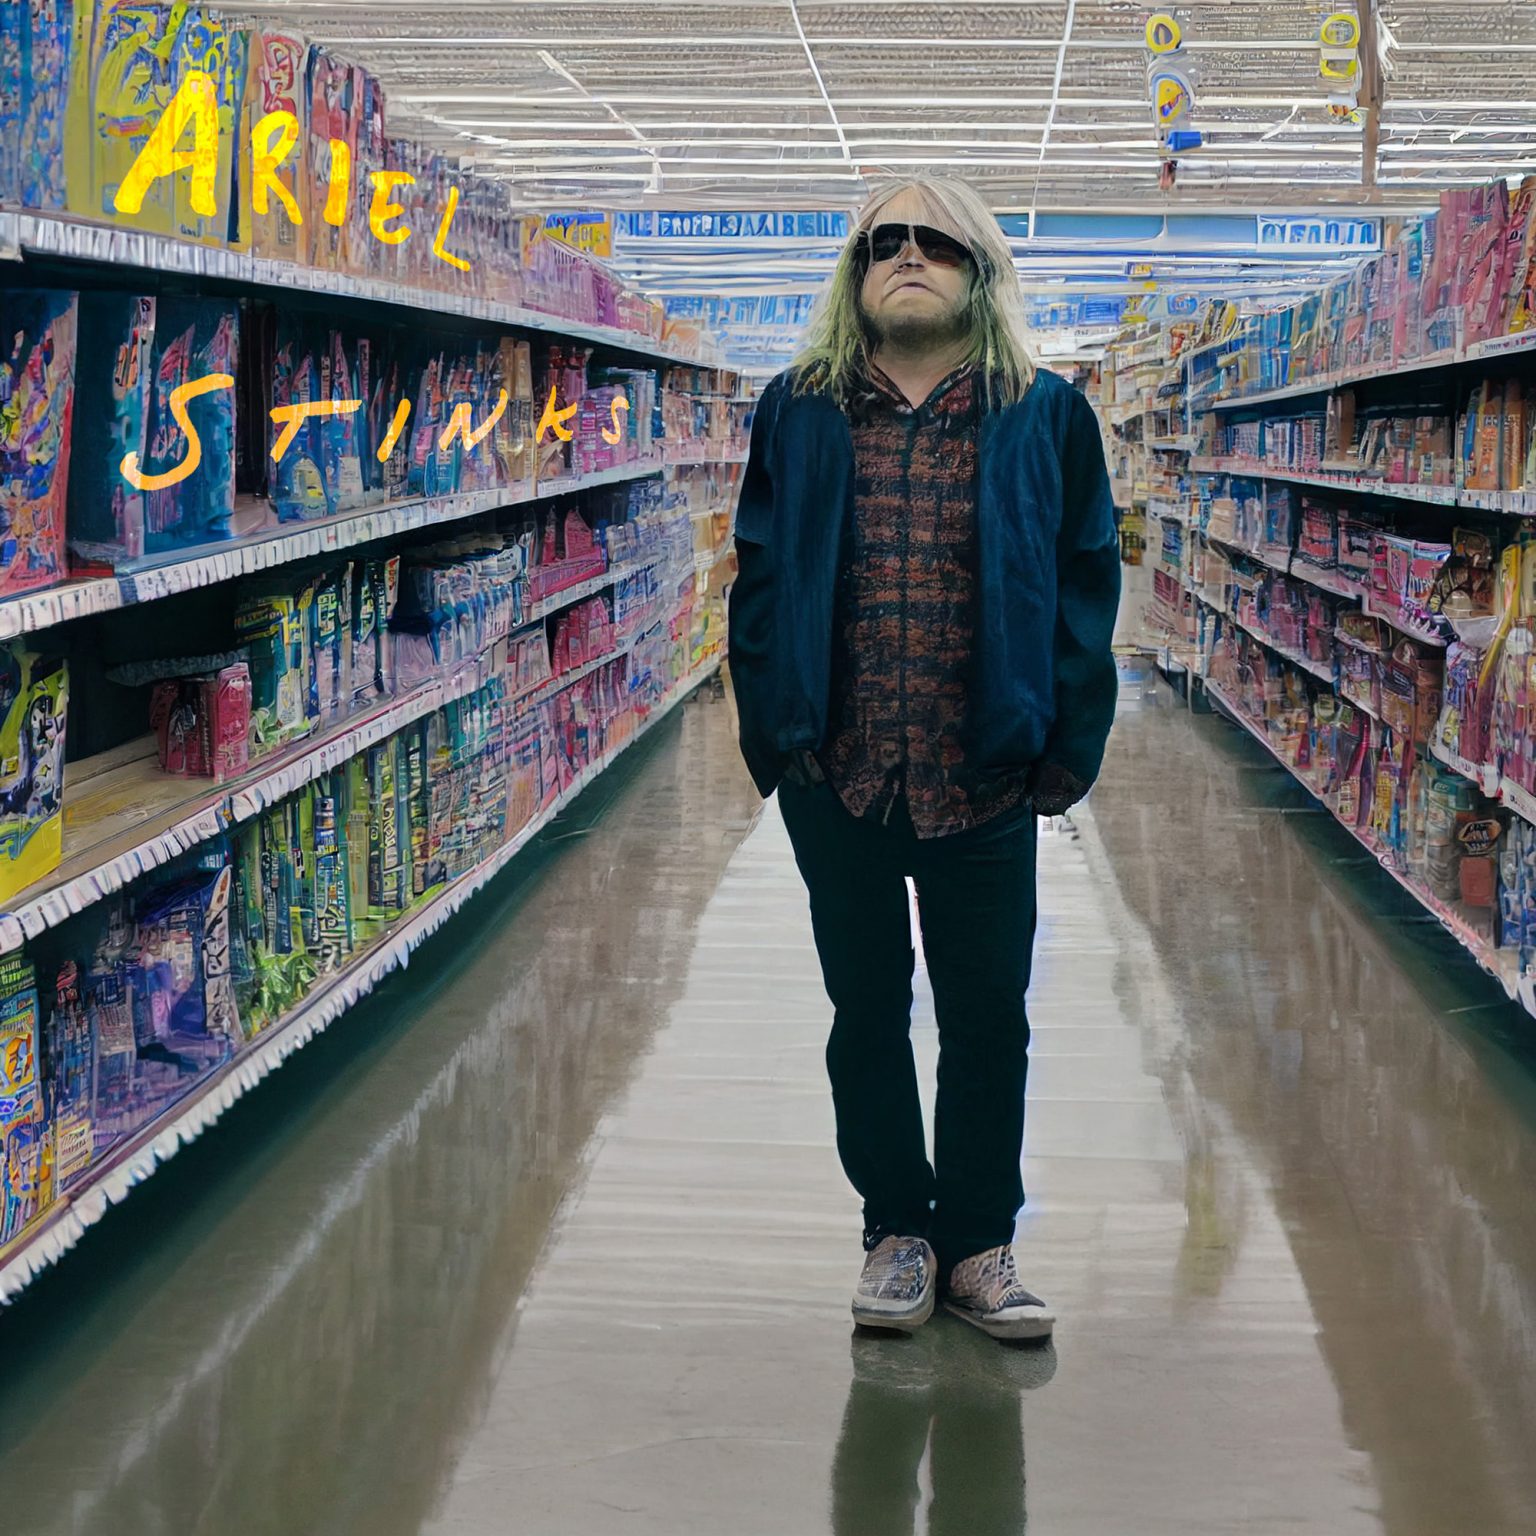 An AI generated image of a disheveled, dumpy man standing alone in the aisle of a big store, the shelves around hi8m lined with brightly colored, indistinguishable products